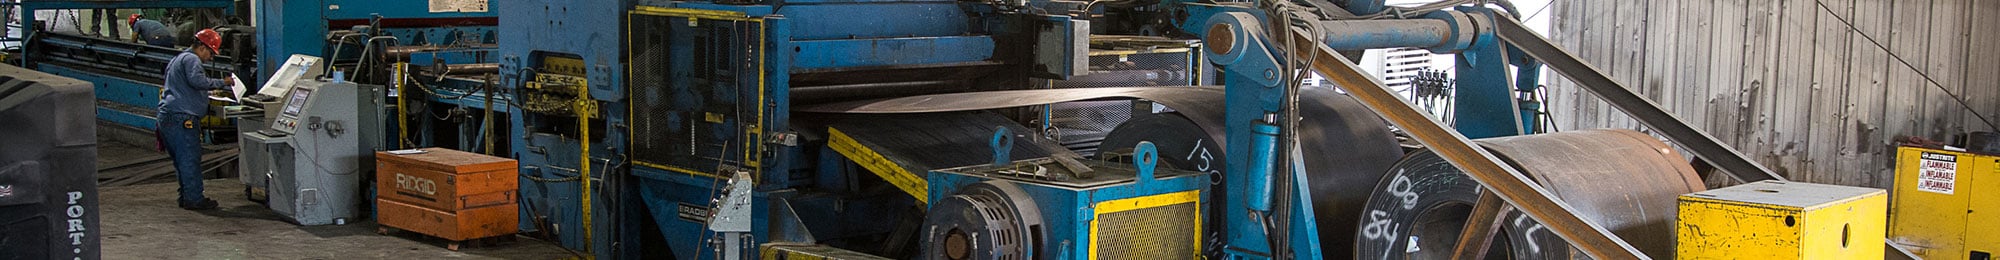 Willbanks Metals - Sheet, Plate, & Structural Steel Products